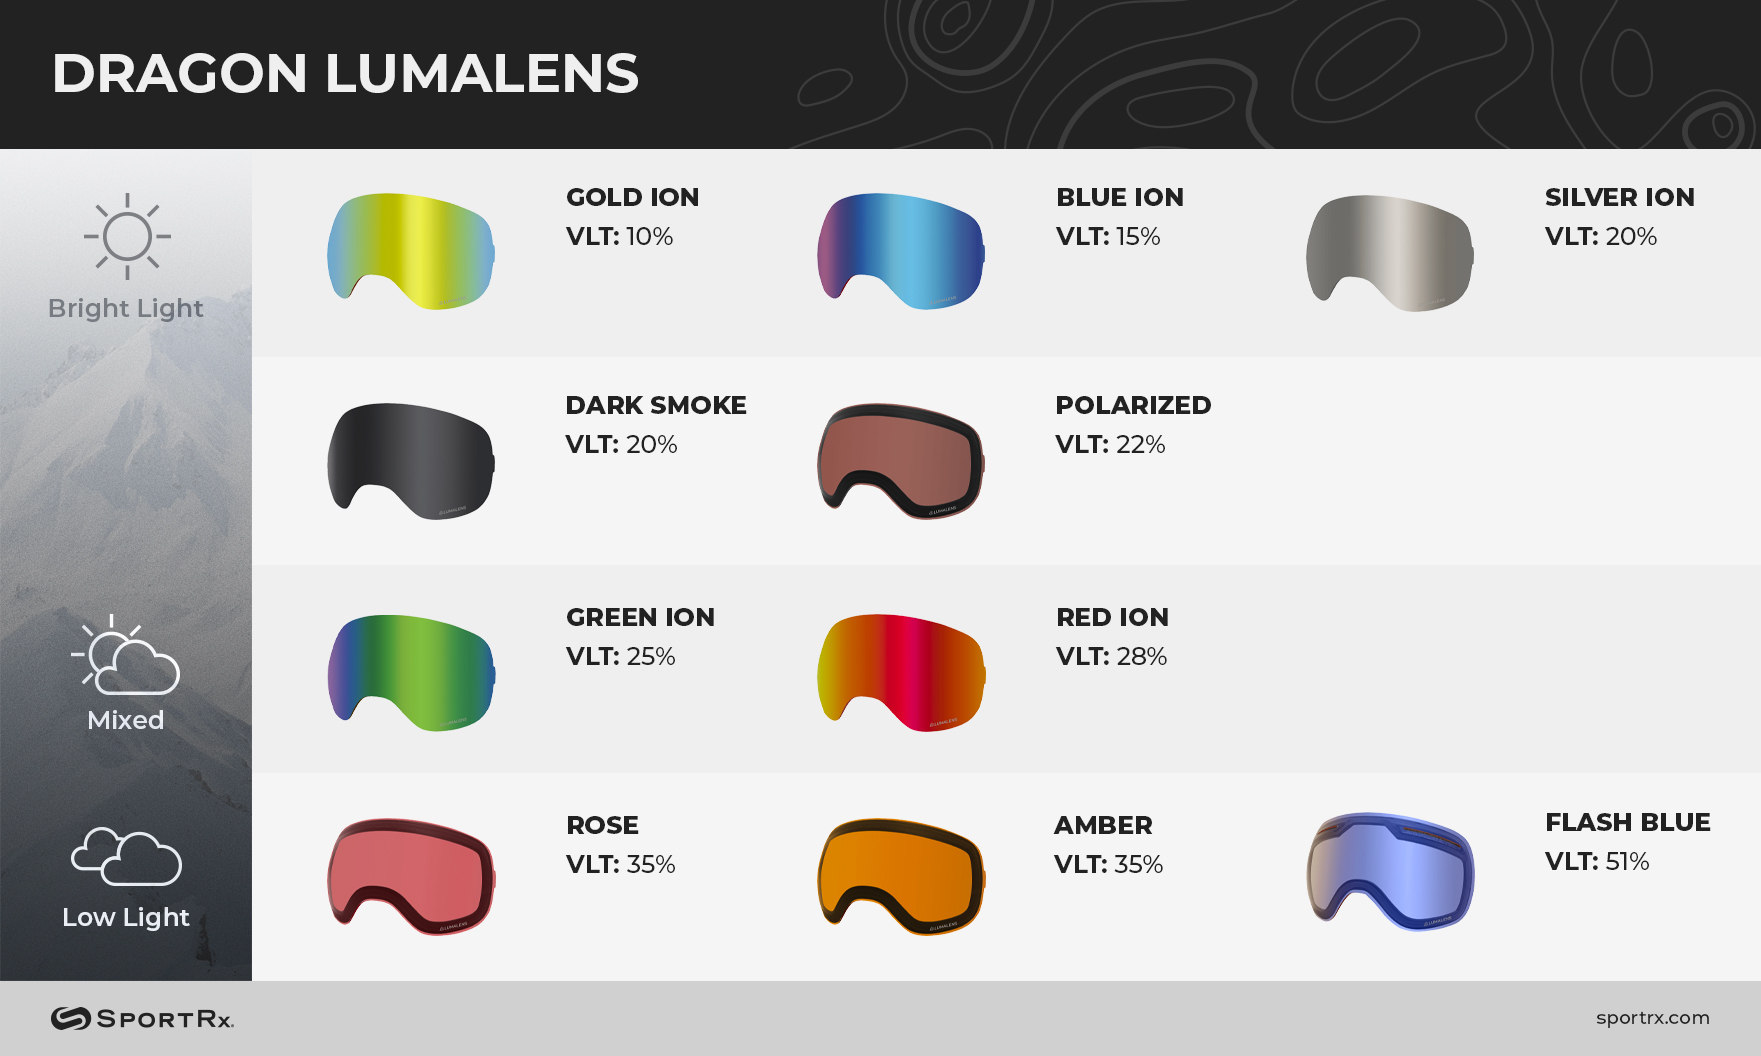 dragon lumalens snow goggle lens chart with snowboarding lenses for bright light everyday light conditions and low light skiing weather